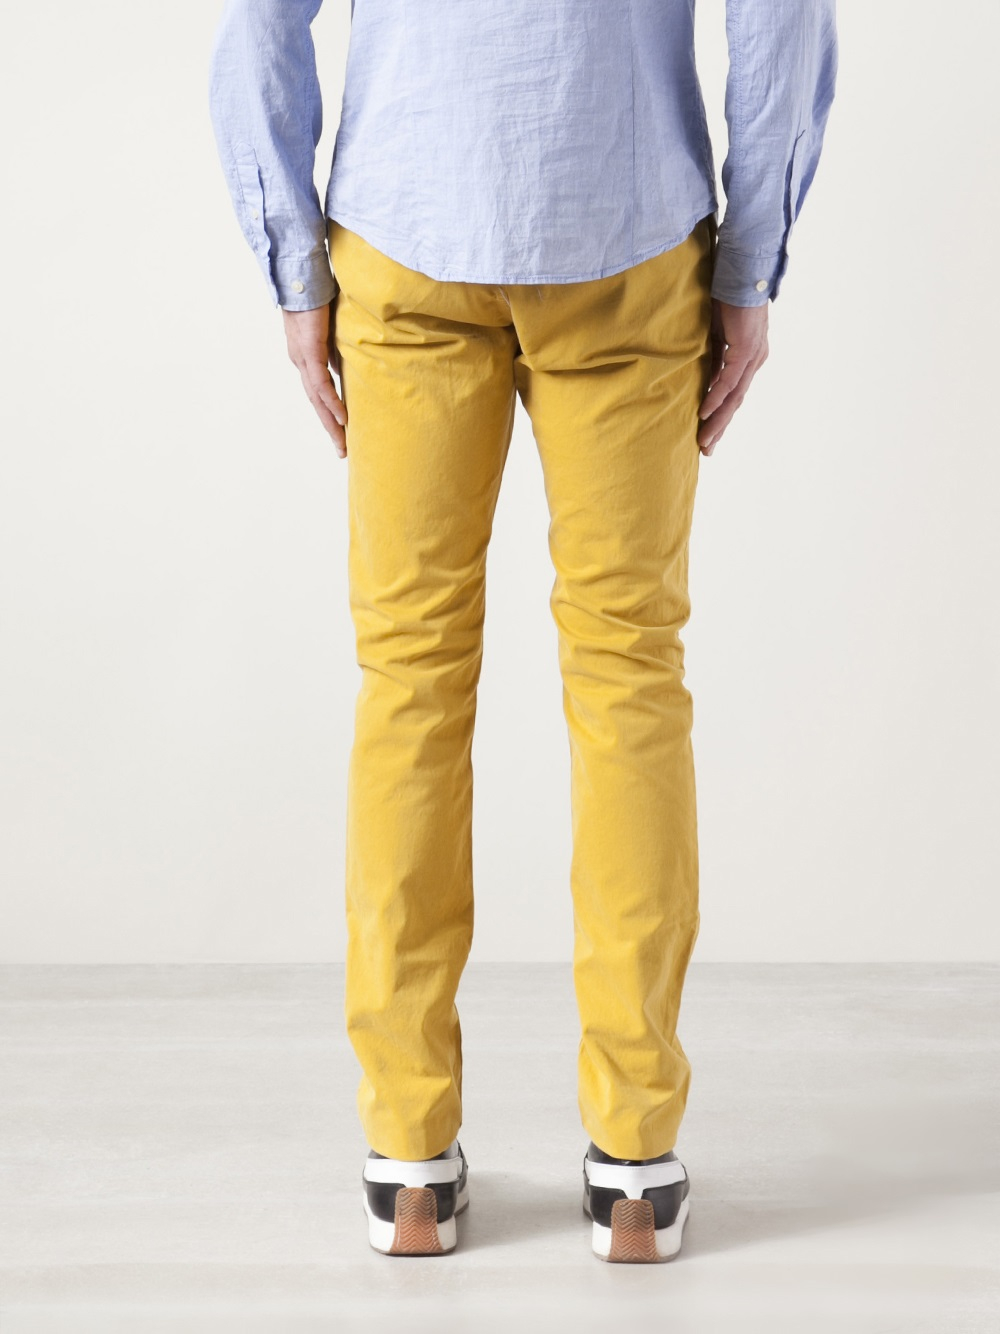 Lyst - Closed Dyed Chino Trousers in Yellow for Men